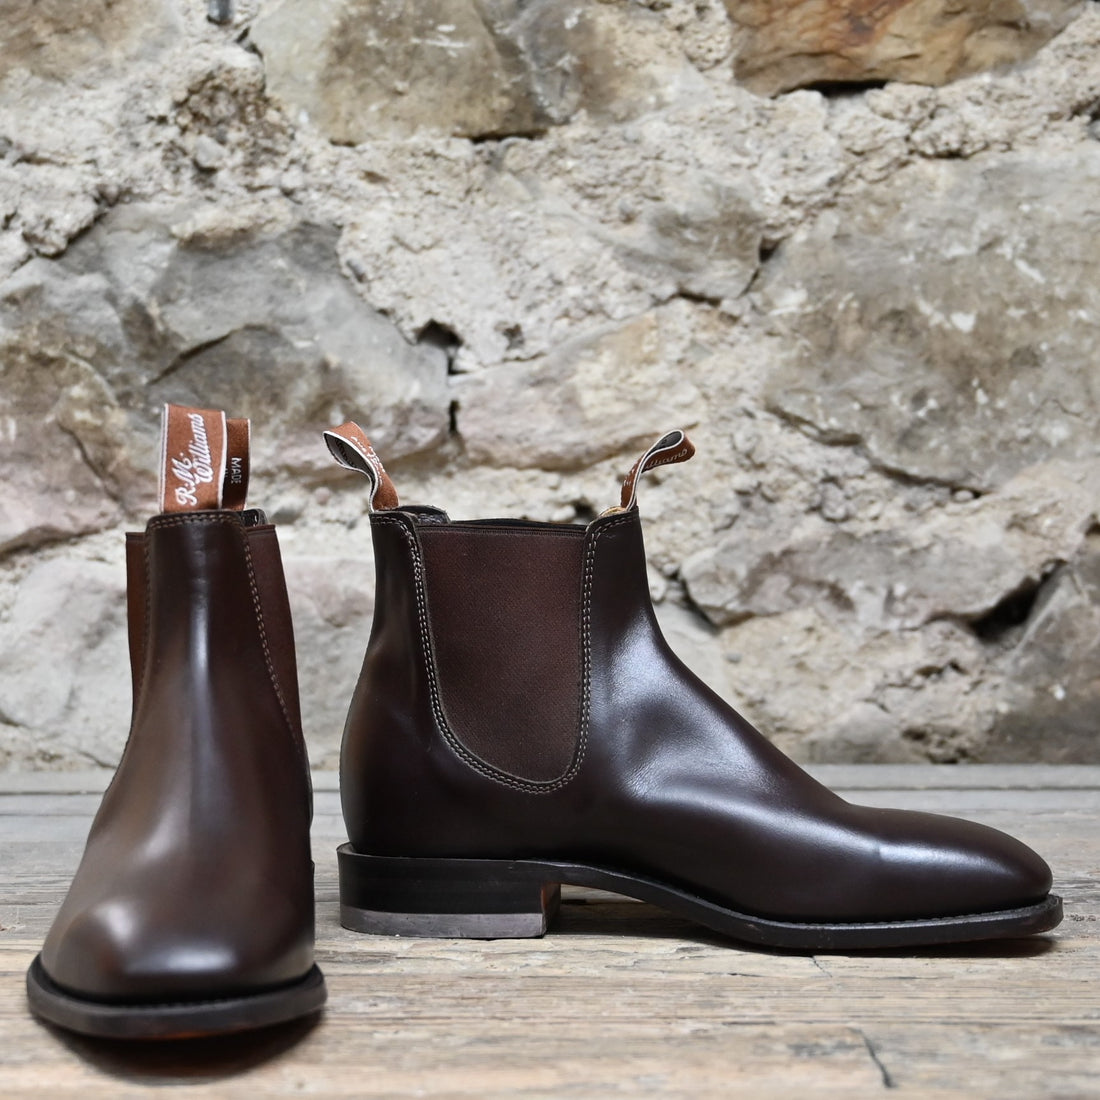 R.M. Williams Craftsman Dress Boot In Chestnut view of front and side